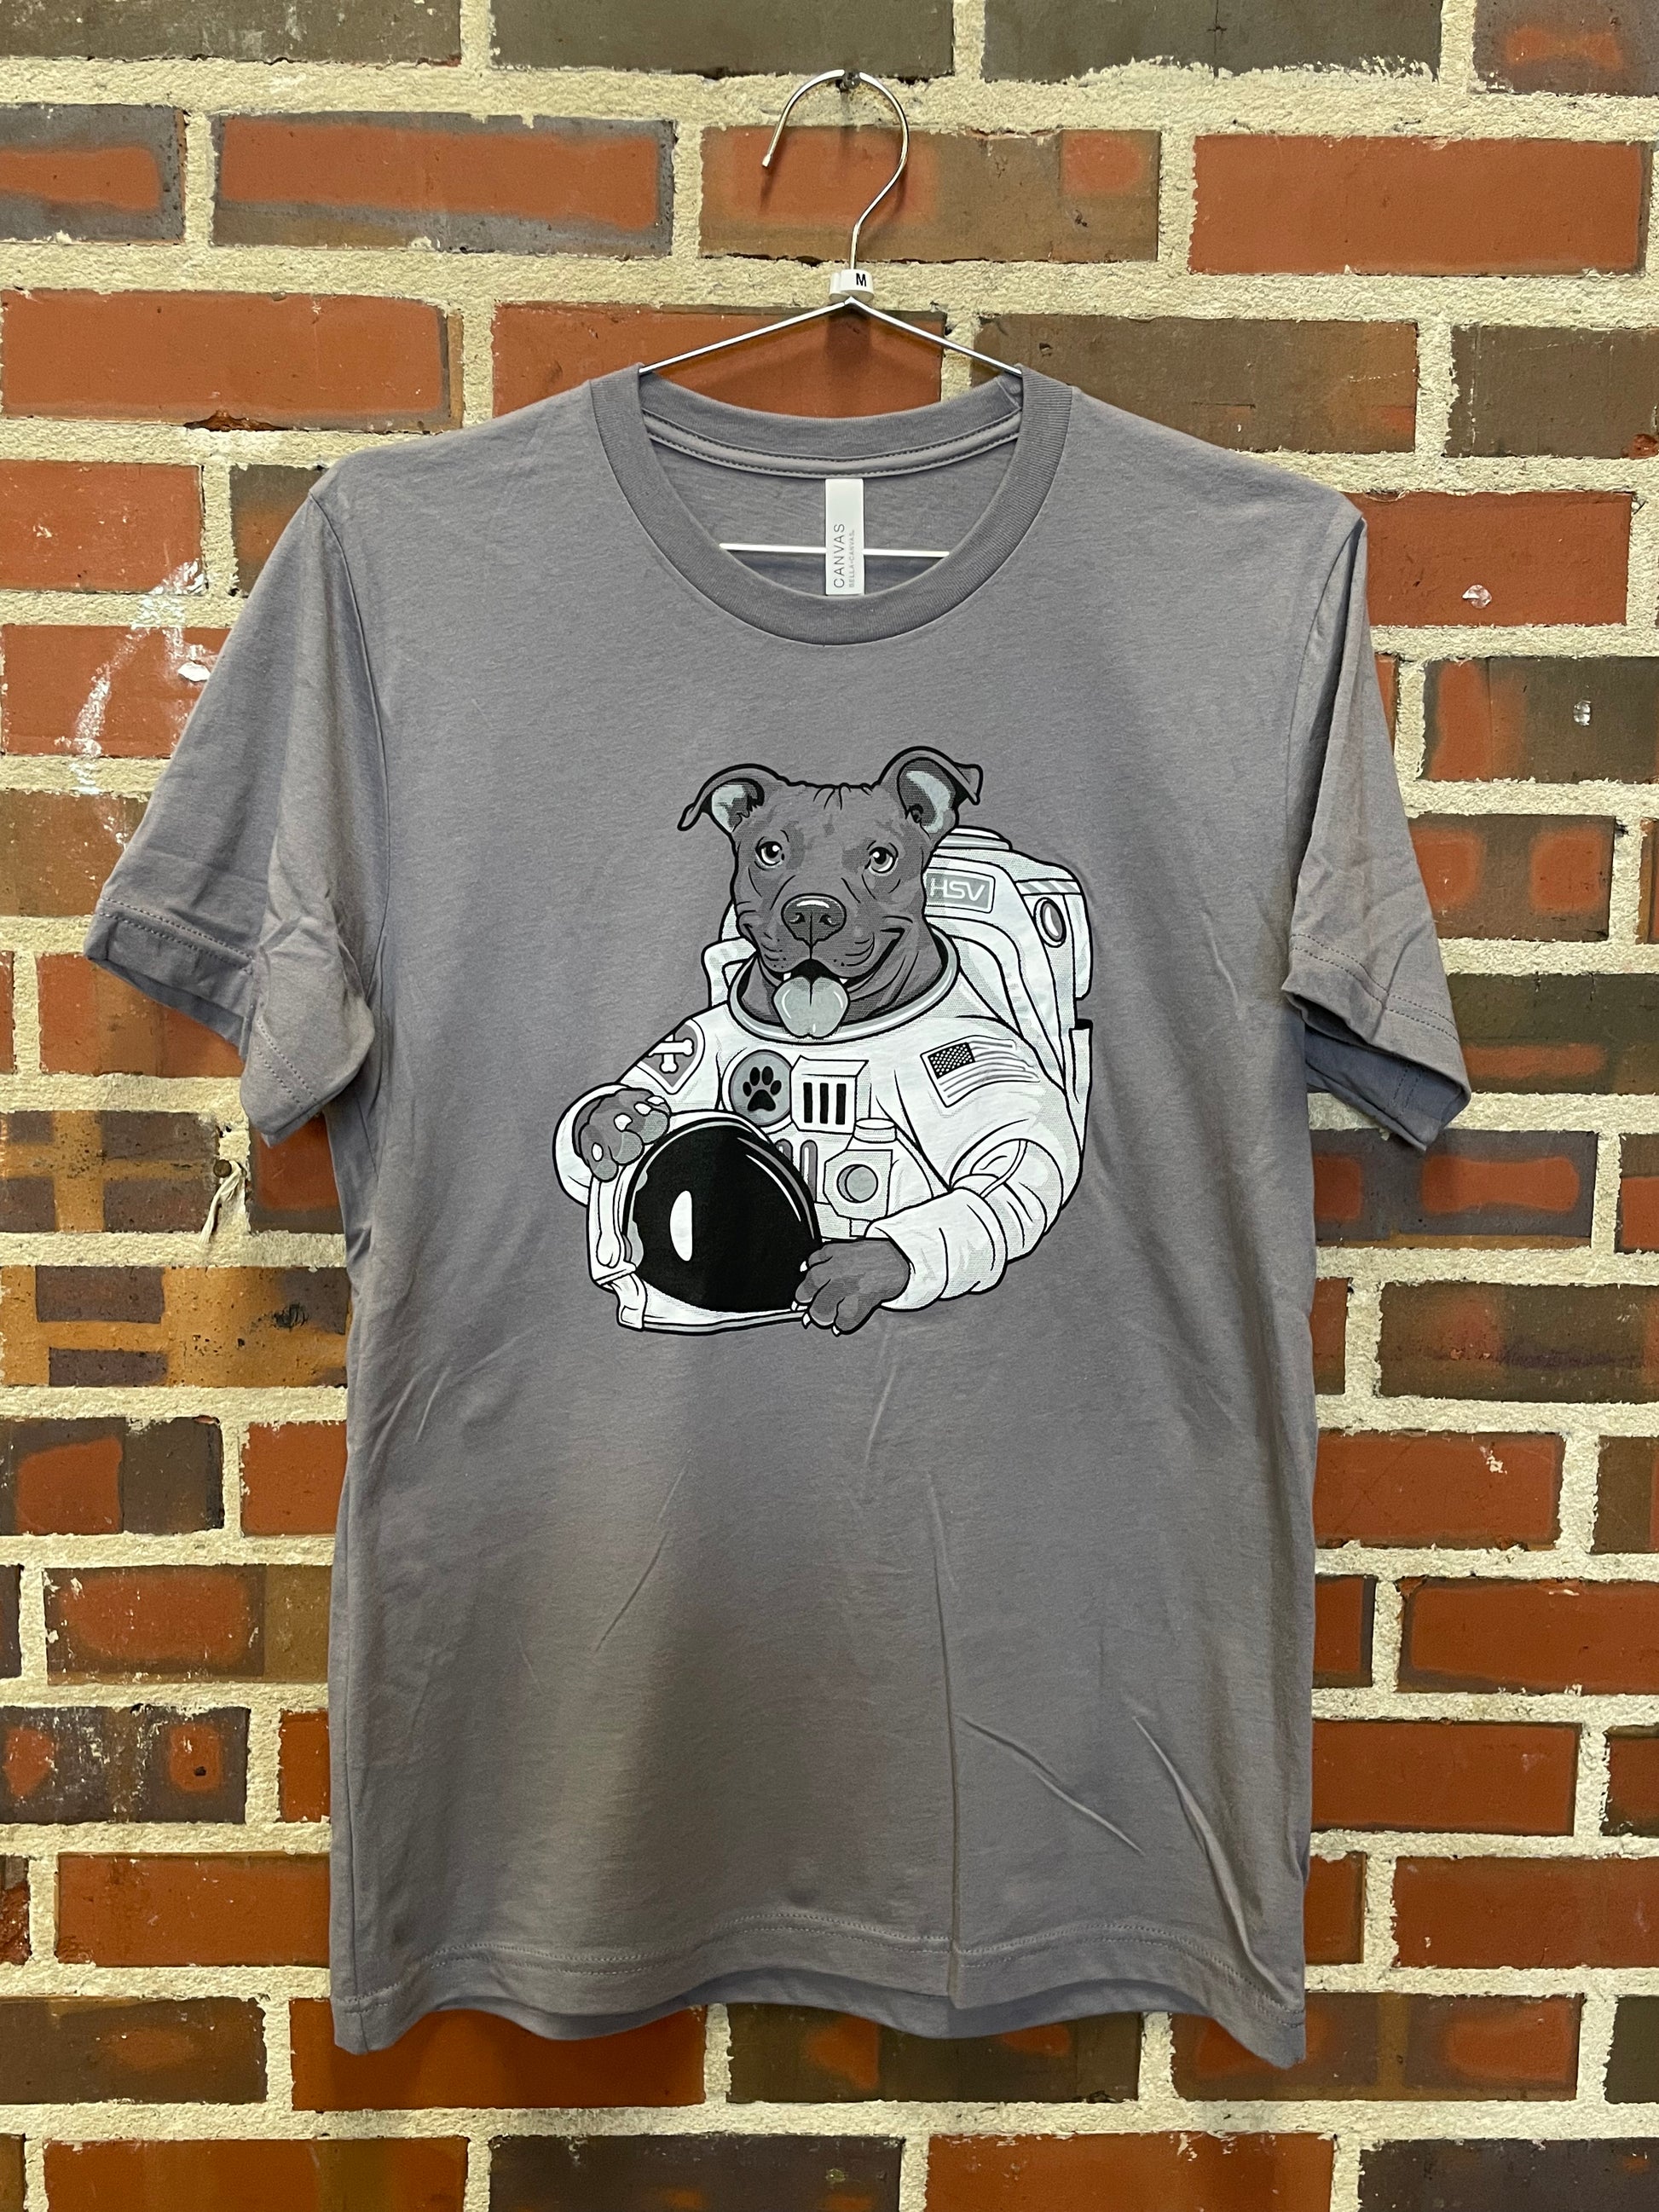 Image of pit bull mix dog dressed as astronaut design on gray t-shirt hanging against brick wall in Lowe Mill